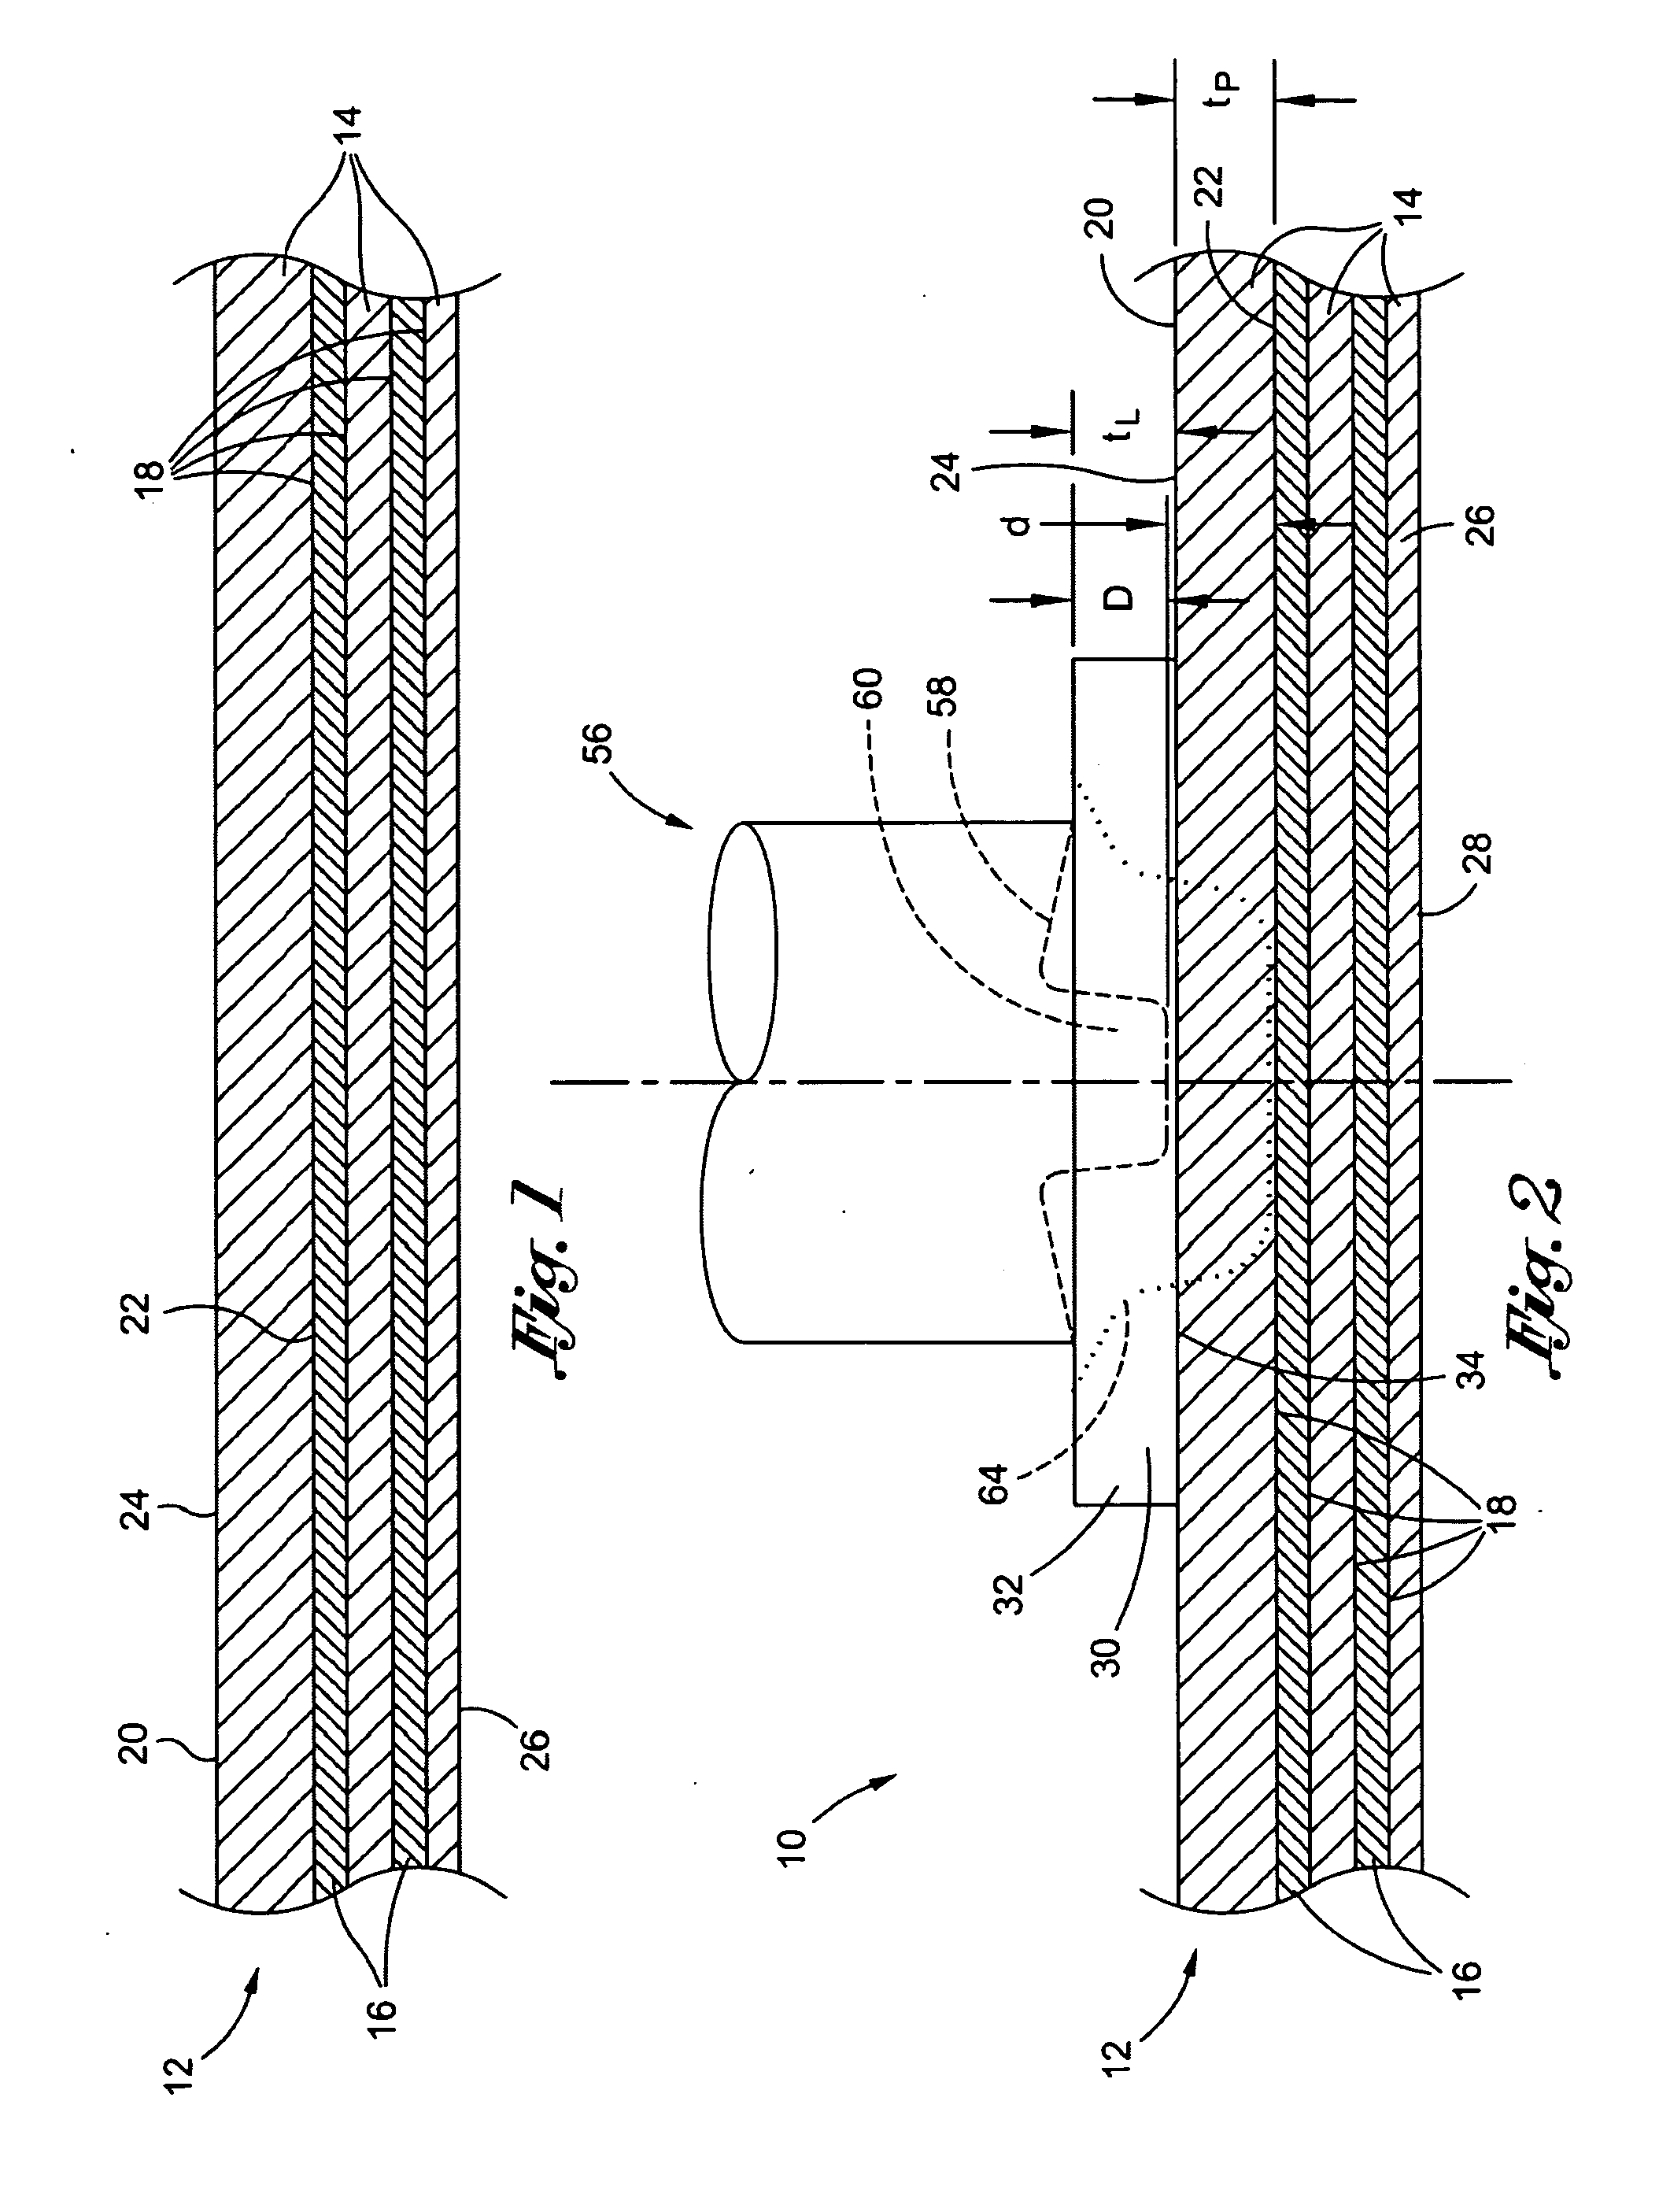 System and method for integrally forming a stiffener with a fiber metal laminate